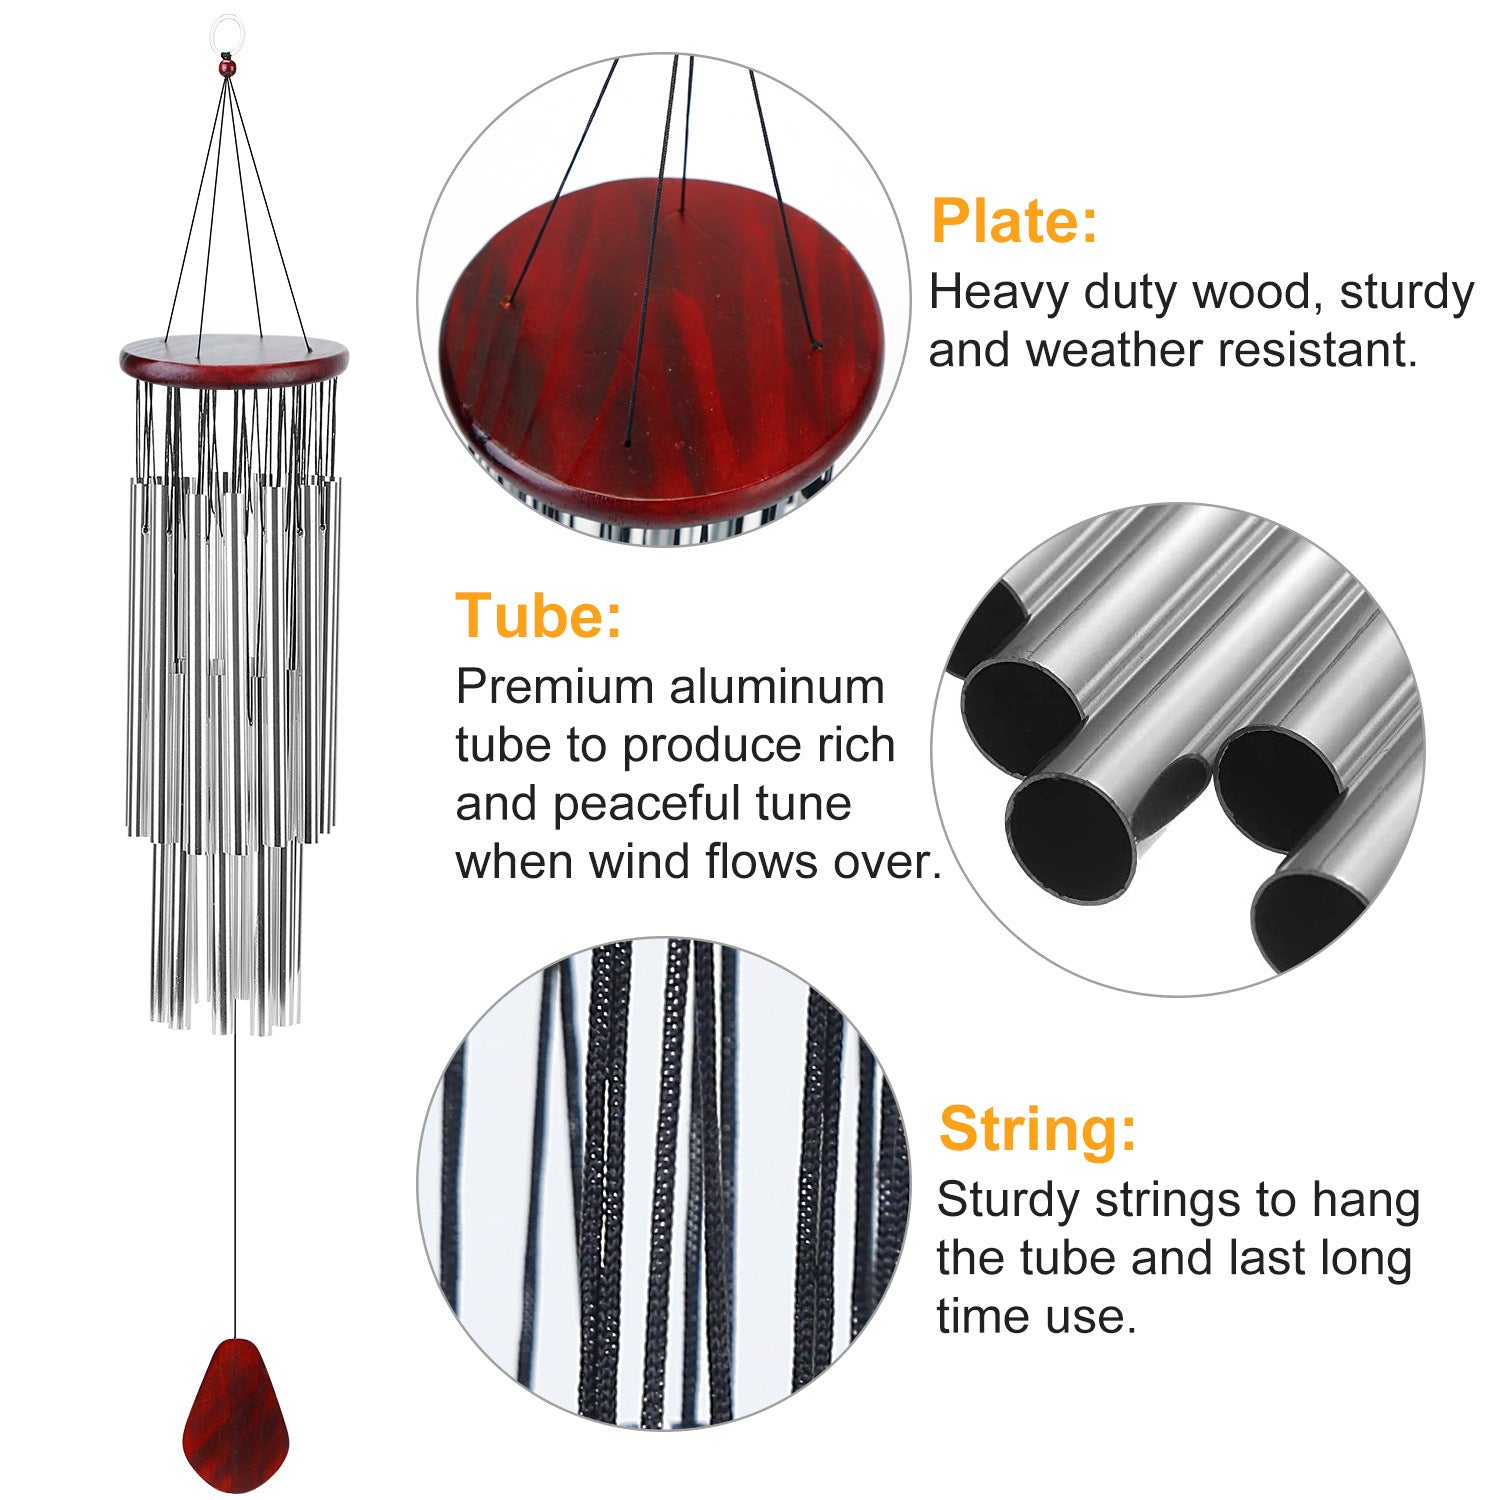 27 Tubes 36in Wind Chimes Indoor Outdoor Smooth Melodic Tones Wind